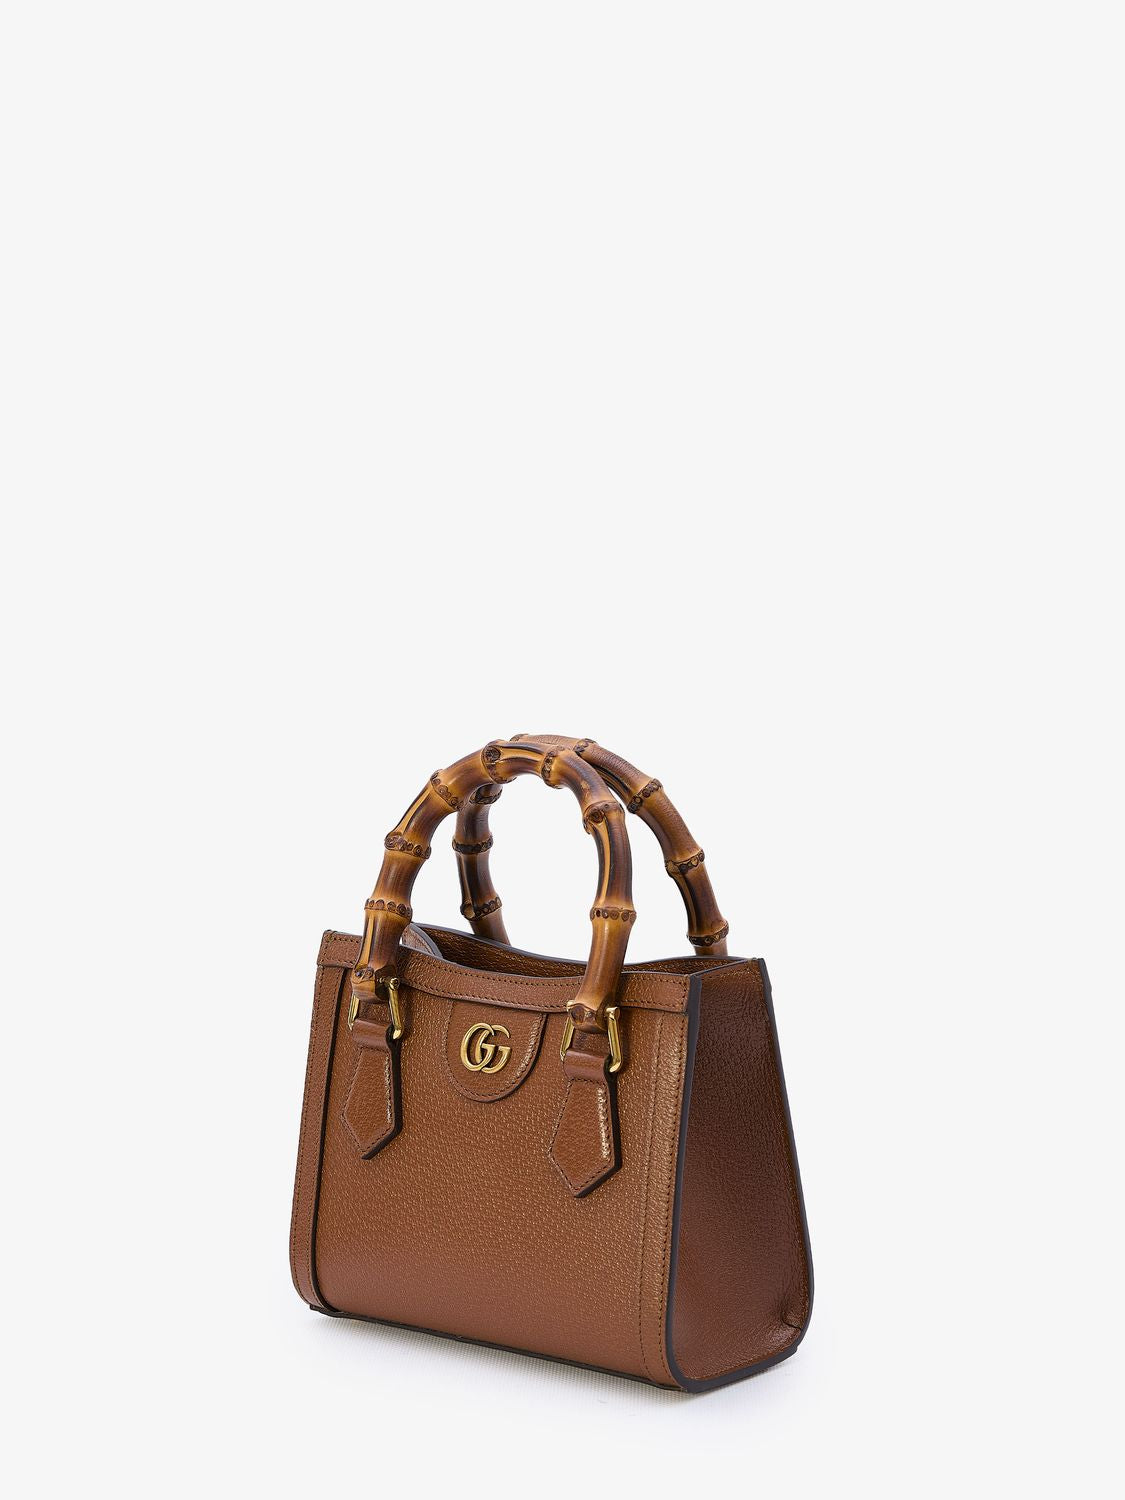 GUCCI Brown Leather Mini Handbag with Gold-Tone Double G, Bamboo Handles & Adjustable Strap, 20x16x10 cm